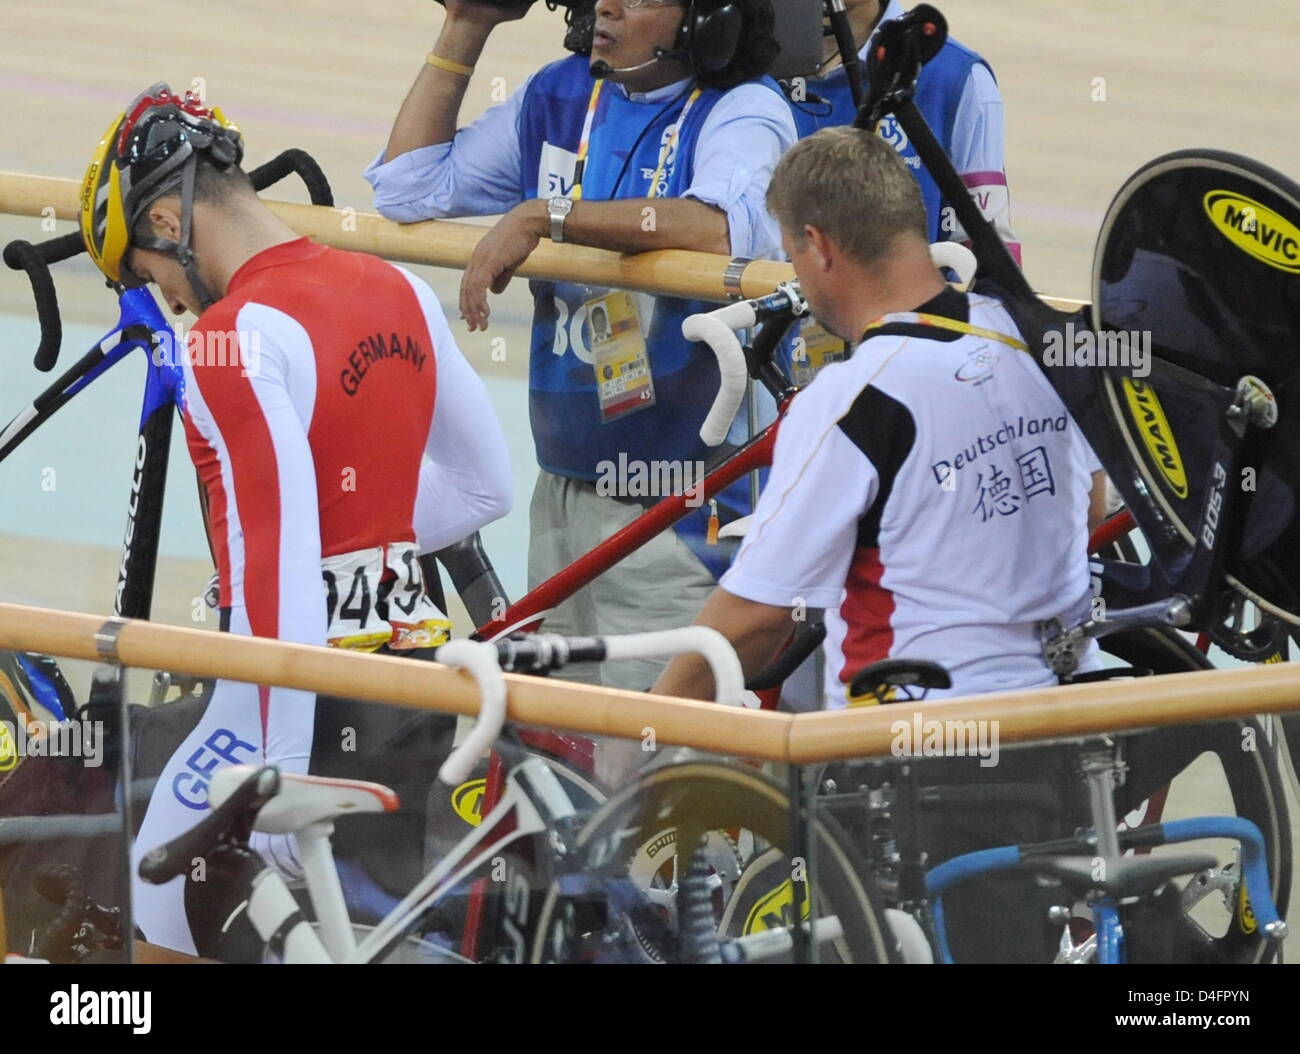 Maximilian Levy (L) of Germany leaves the track after the Men's Sprint Semifinal in the Cycling - Track competition at Laoshan Velodrome at the Beijing 2008 Olympic Games, Beijing, China, 19 August 2008. Photo: Peer Grimm dpa ###dpa### Stock Photo